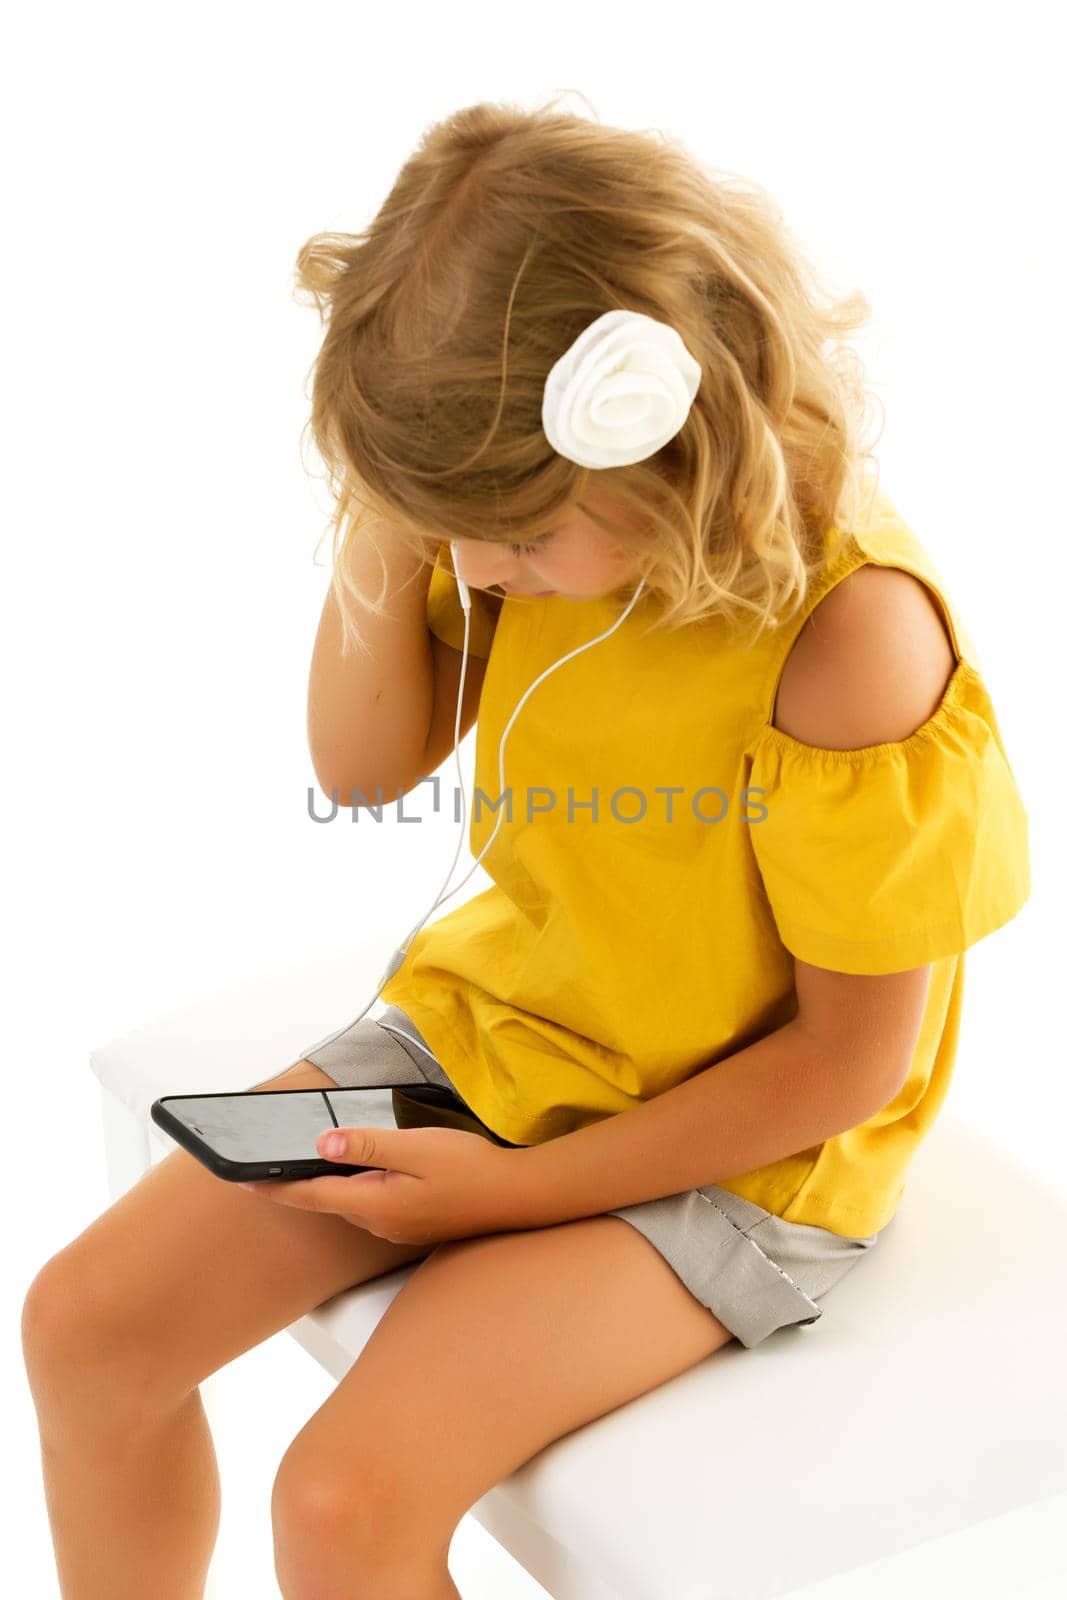 Cute little kid girl wearing headphones listening to music. Kid listening to music. Music recommended based on initial interest. The best free music apps for your mobile device. Enjoy the sound.Isolated on a white background.